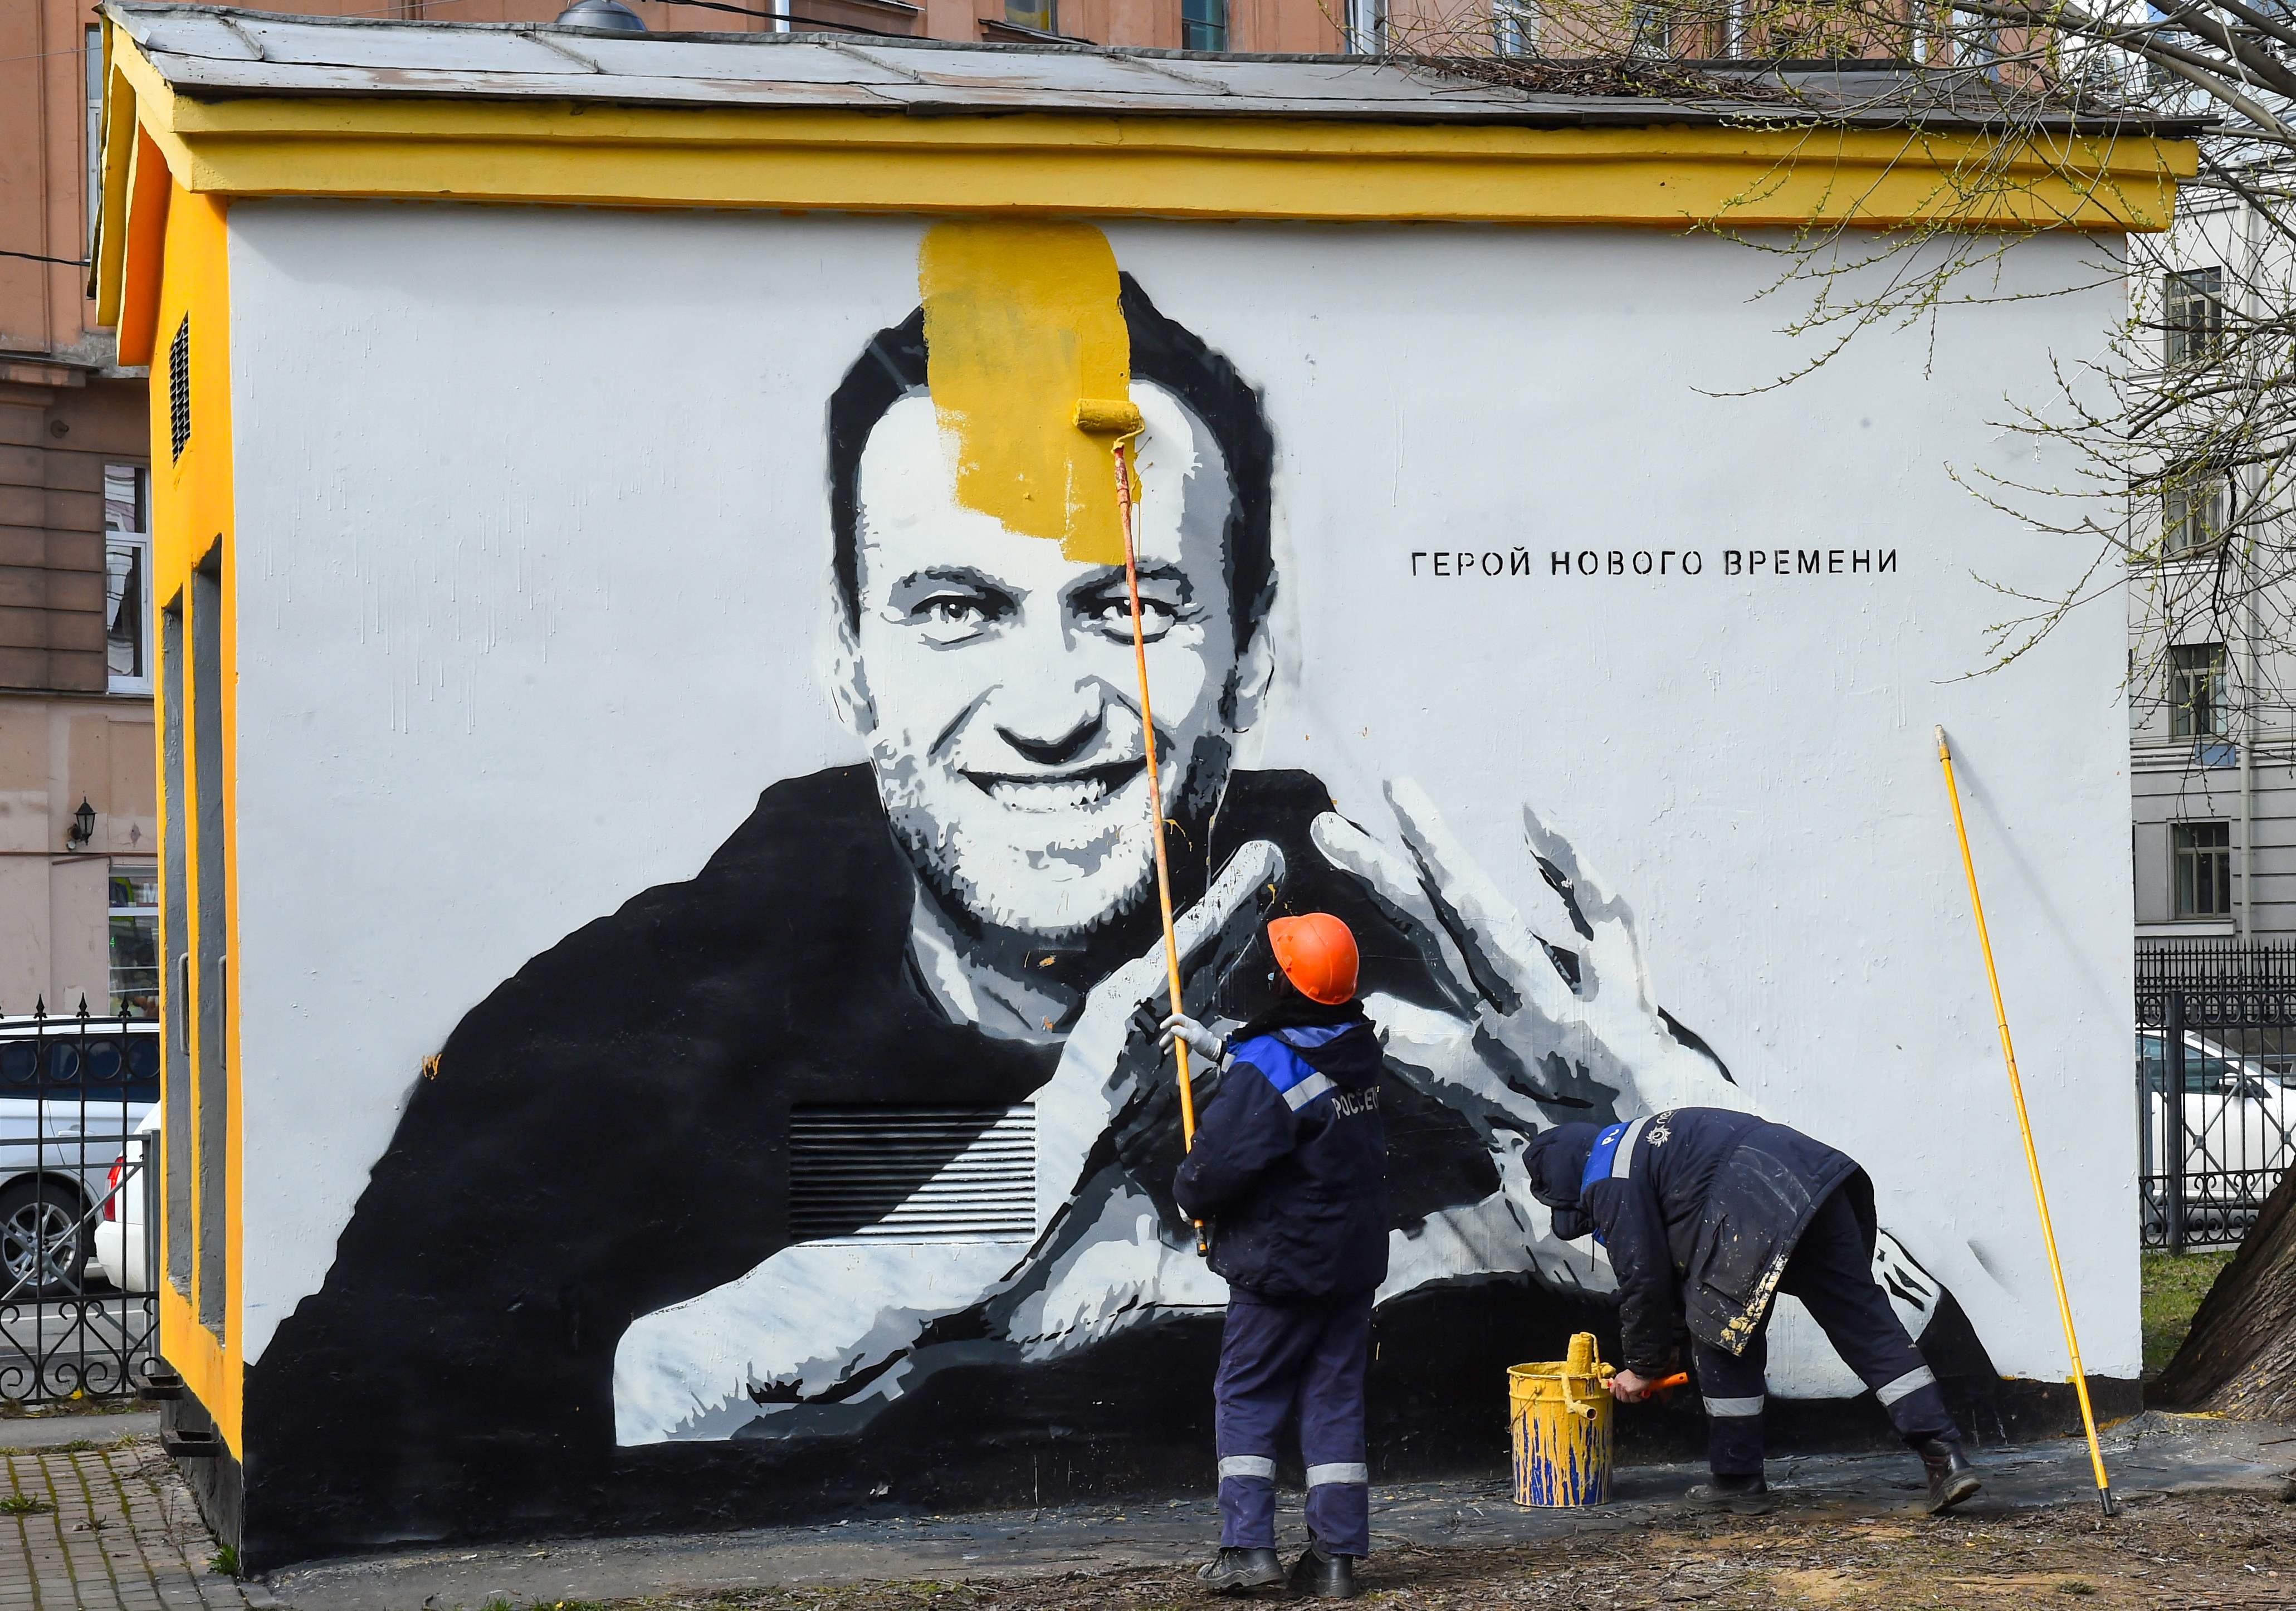 a worker paints over graffiti of jailed Kremlin critic Alexei Navalny in Saint Petersburg. The inscription reads: "The hero of the new times".